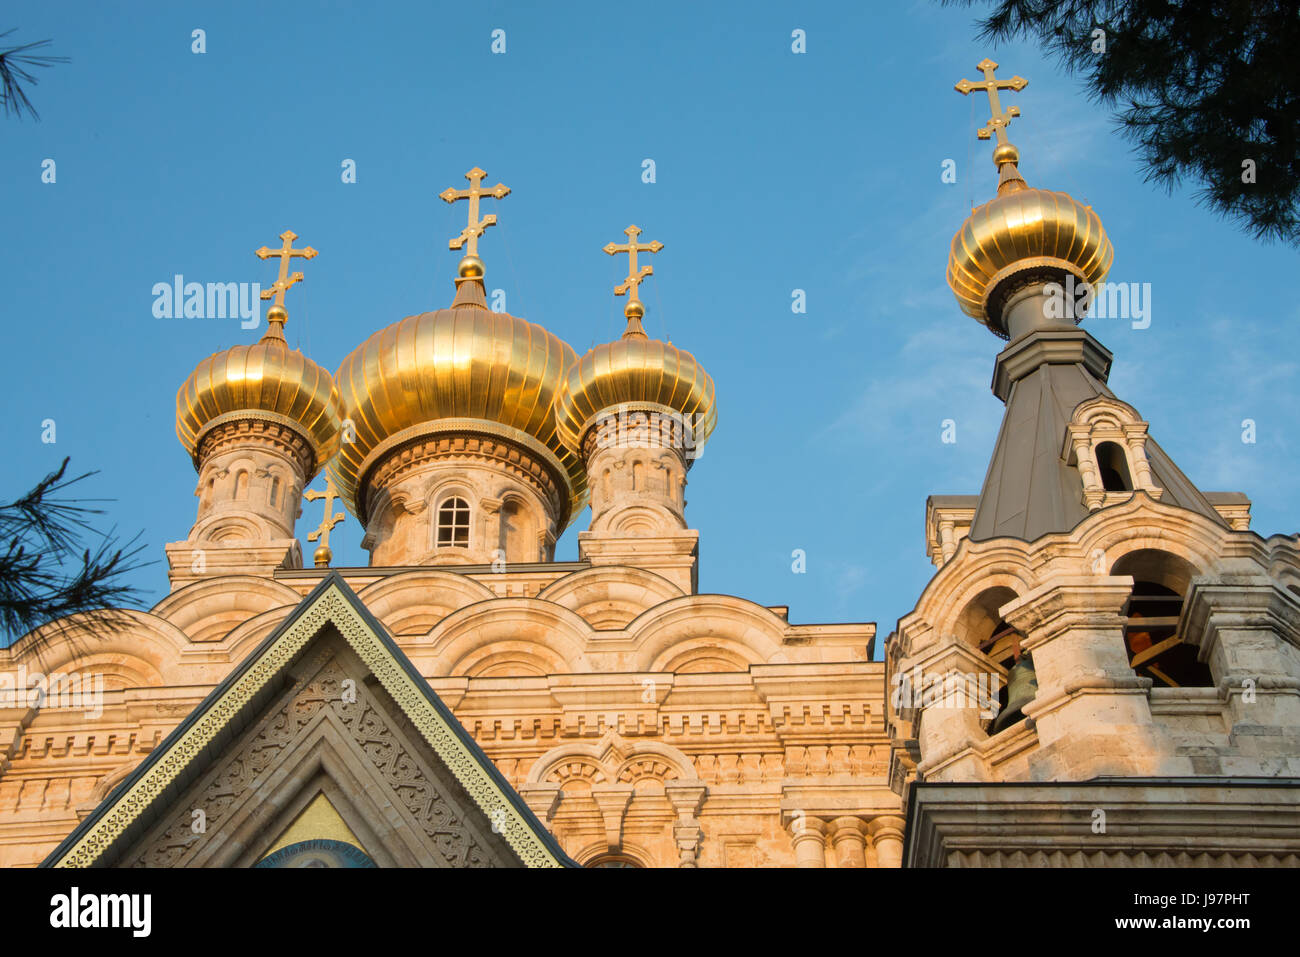 The onion-shaped spires of the Russian Orthodox Church of Mary Magdalene, situated in the Garden of Gethsemane on the Mount of Olives, glow in the evening sun. Jerusalem, April 17, 2014. Stock Photo